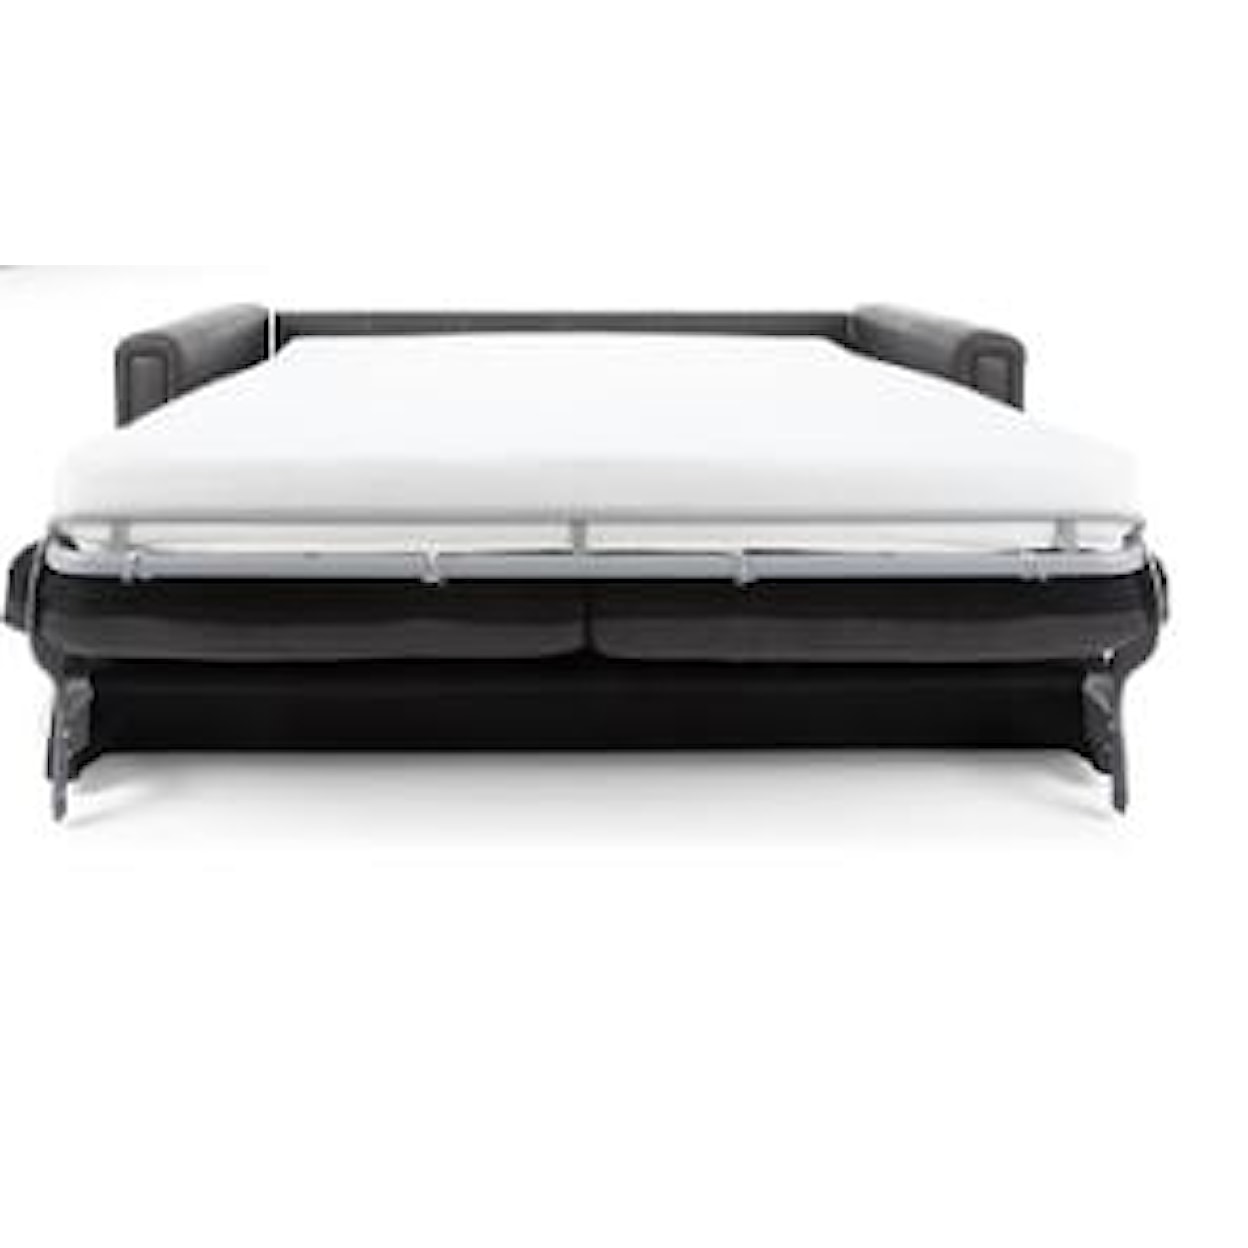 Superstyle L9350 Sofa Bed